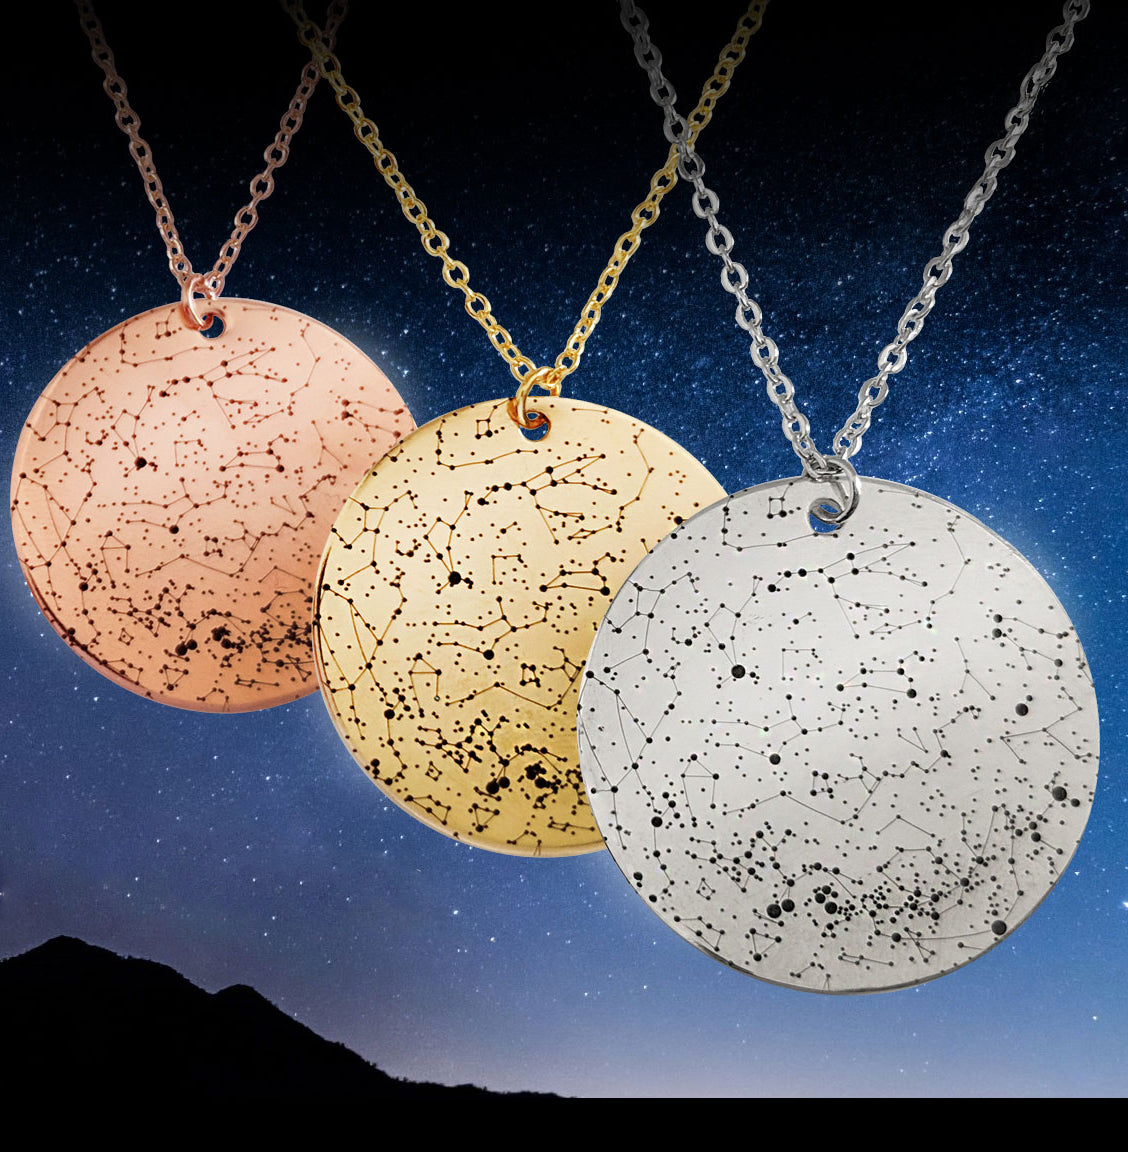 Star Map Jewelry Gifts for Your Loved One